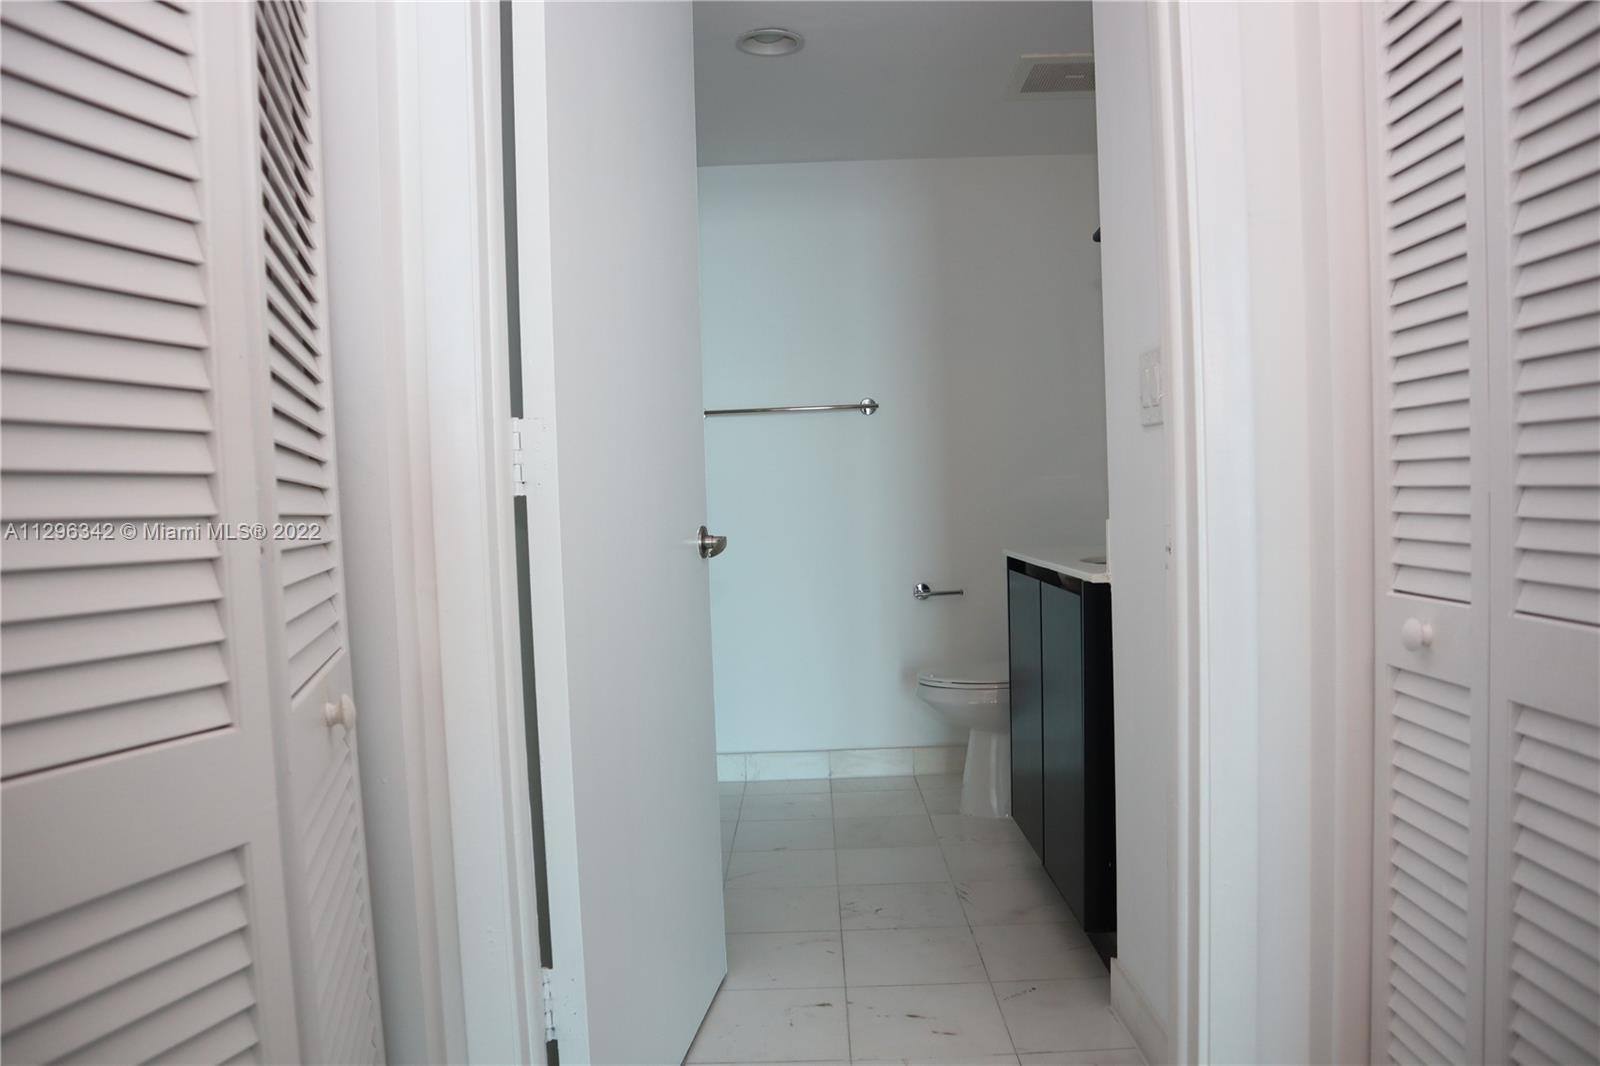 Photo 33 of Onyx on The Bay Apt 2403 in Miami - MLS A11296342